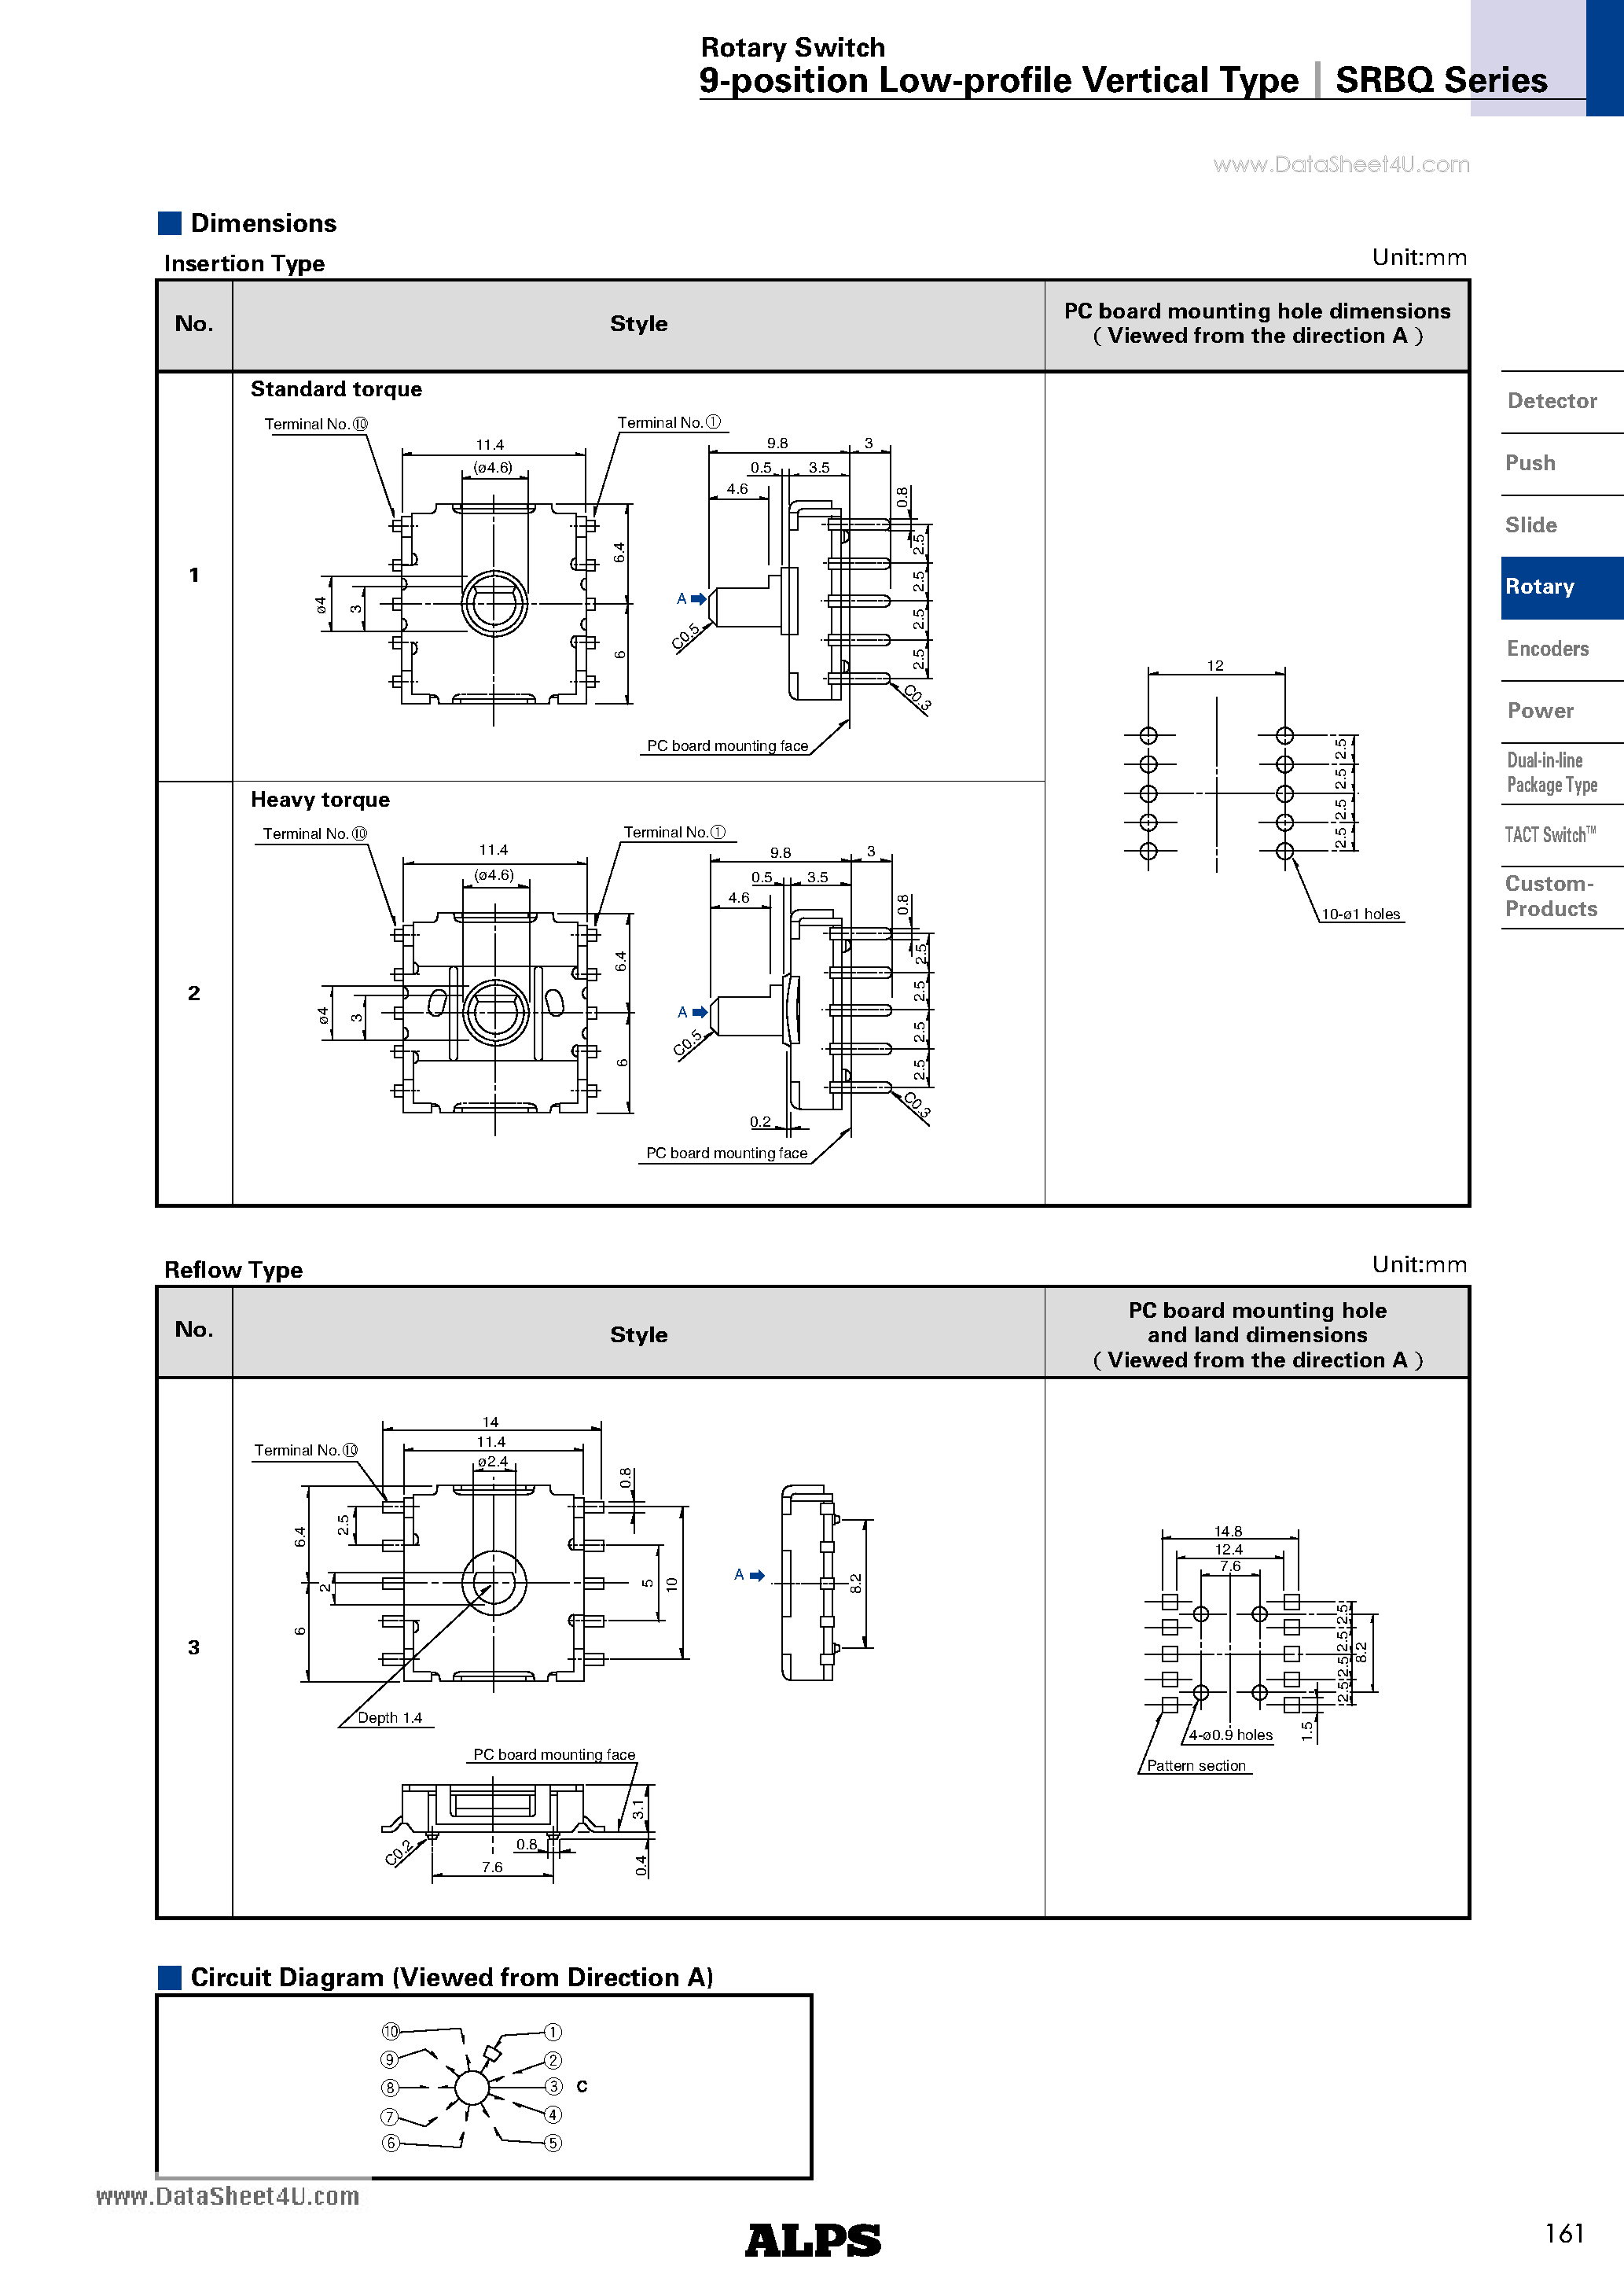 Datasheet SRBQ - 9-position Low-profile Vertical Type page 2